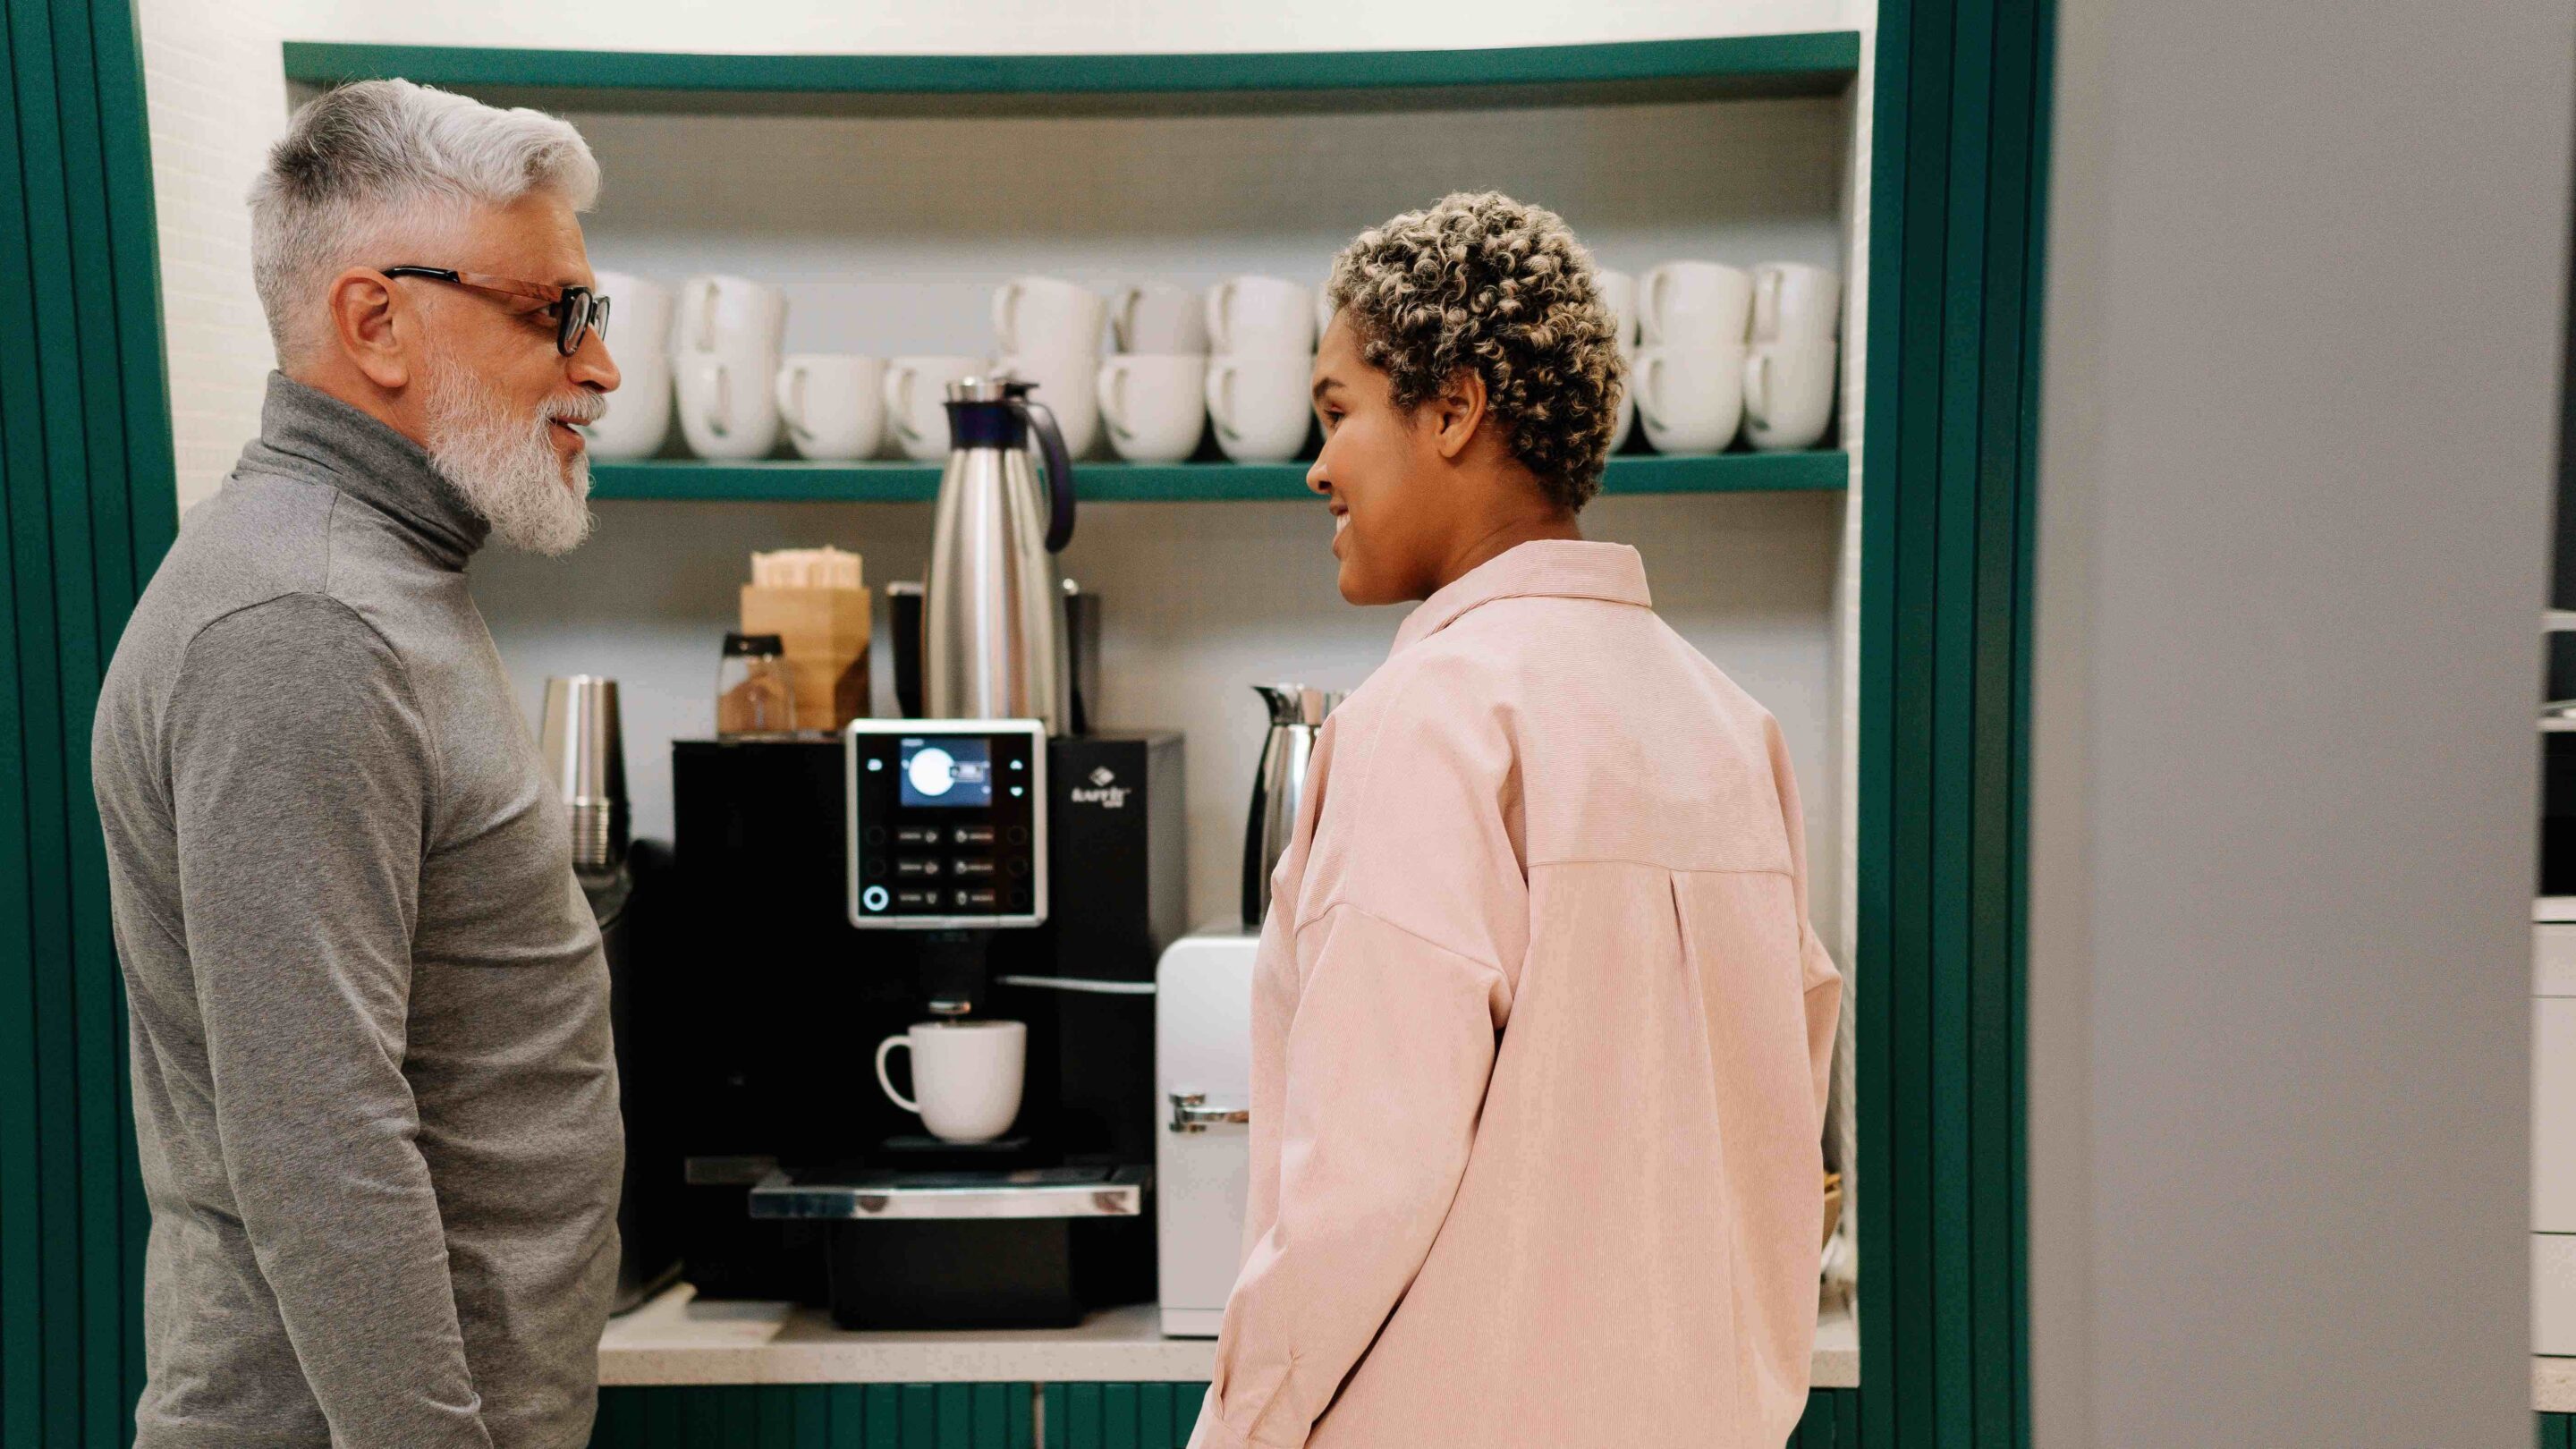 Older male and younger woman stood by a coffee machine chatting while they wait.